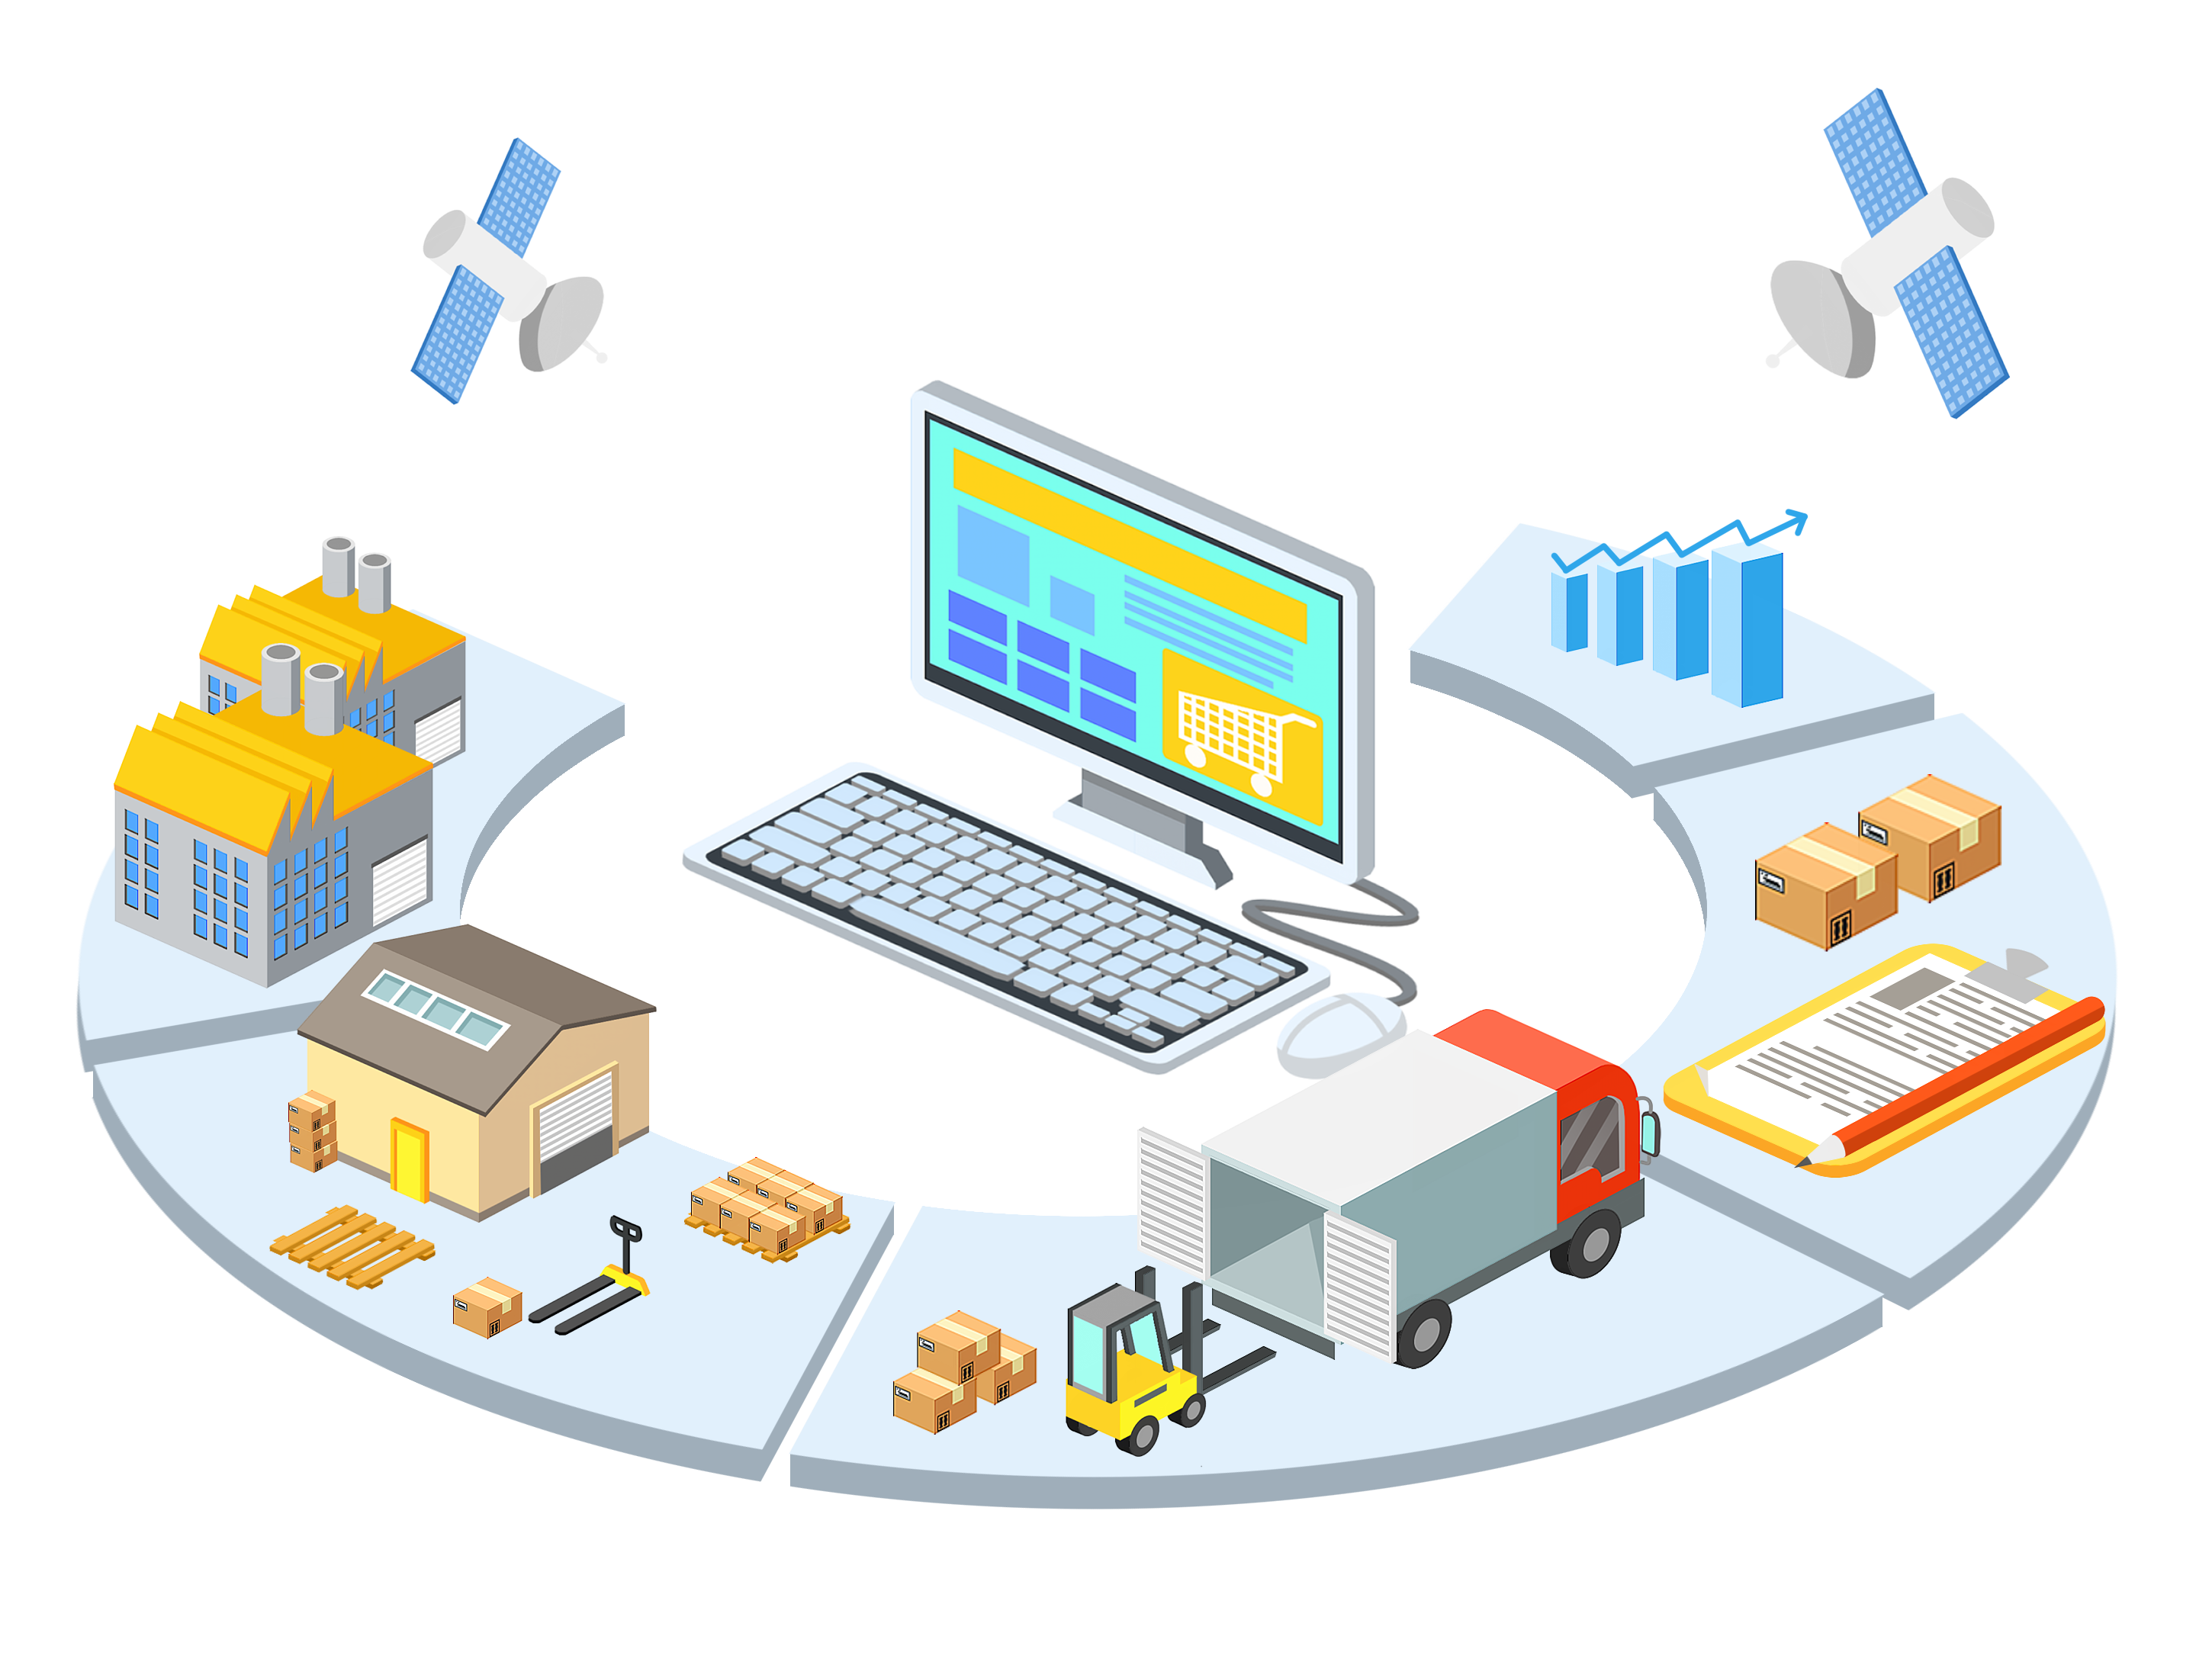 IMS - Inventory management system